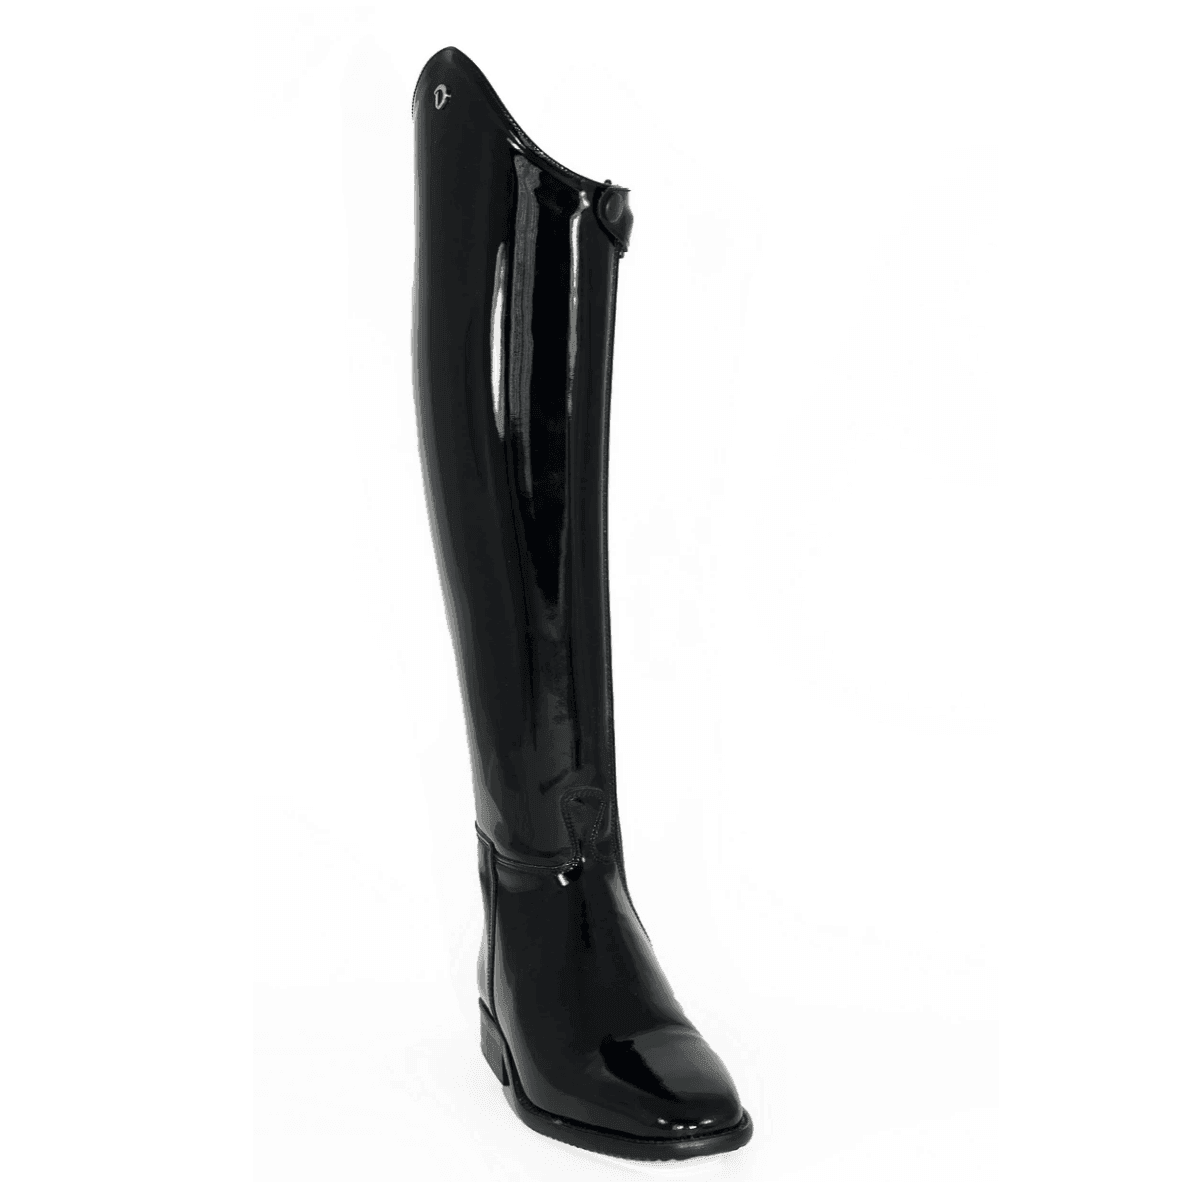 Customized Derby Boots | Dressage Boots by Halter Ego - Halter Ego®